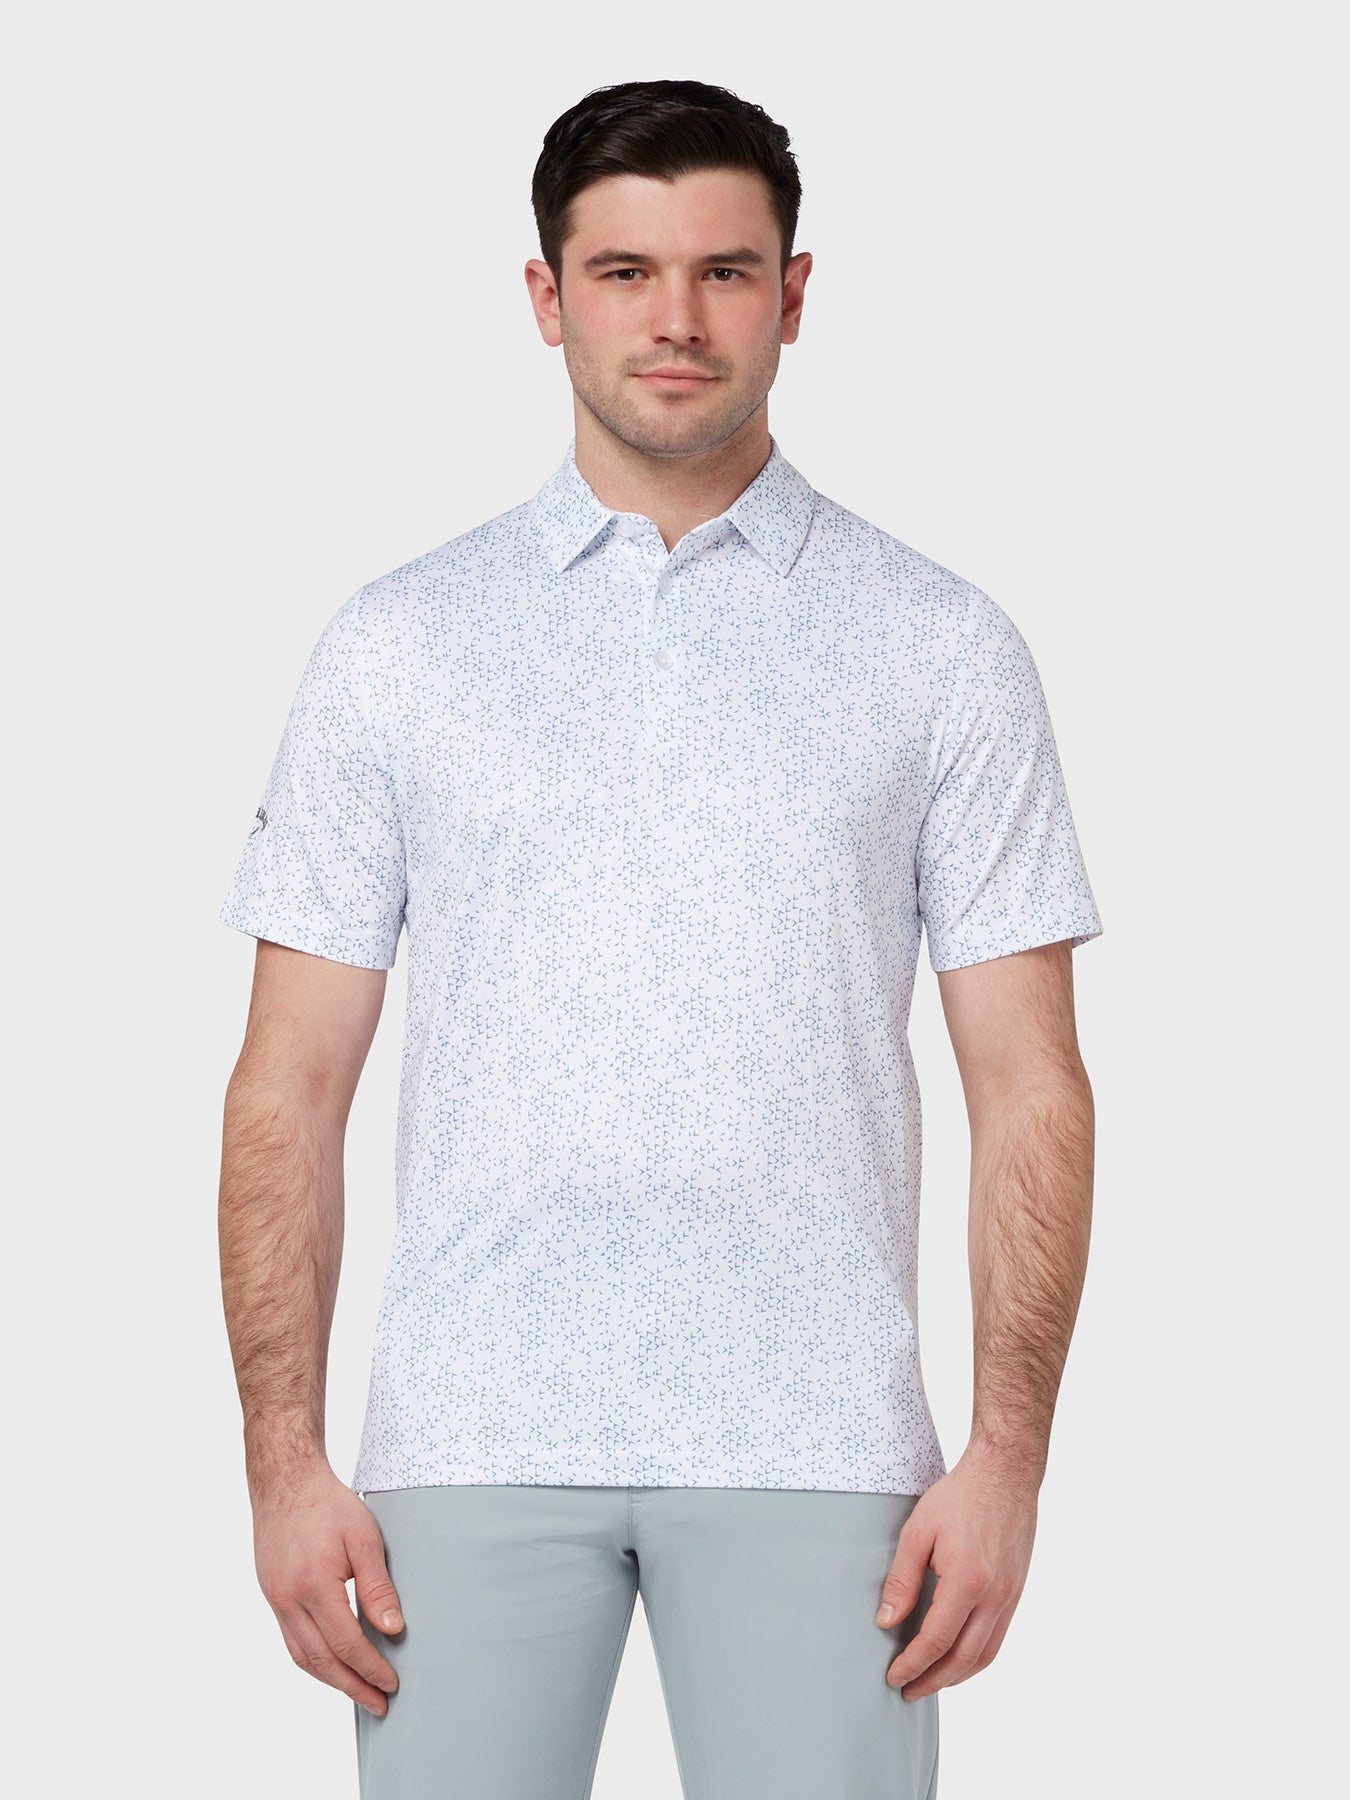 View All Over Chev Printed Polo In Bright White Bright White S information